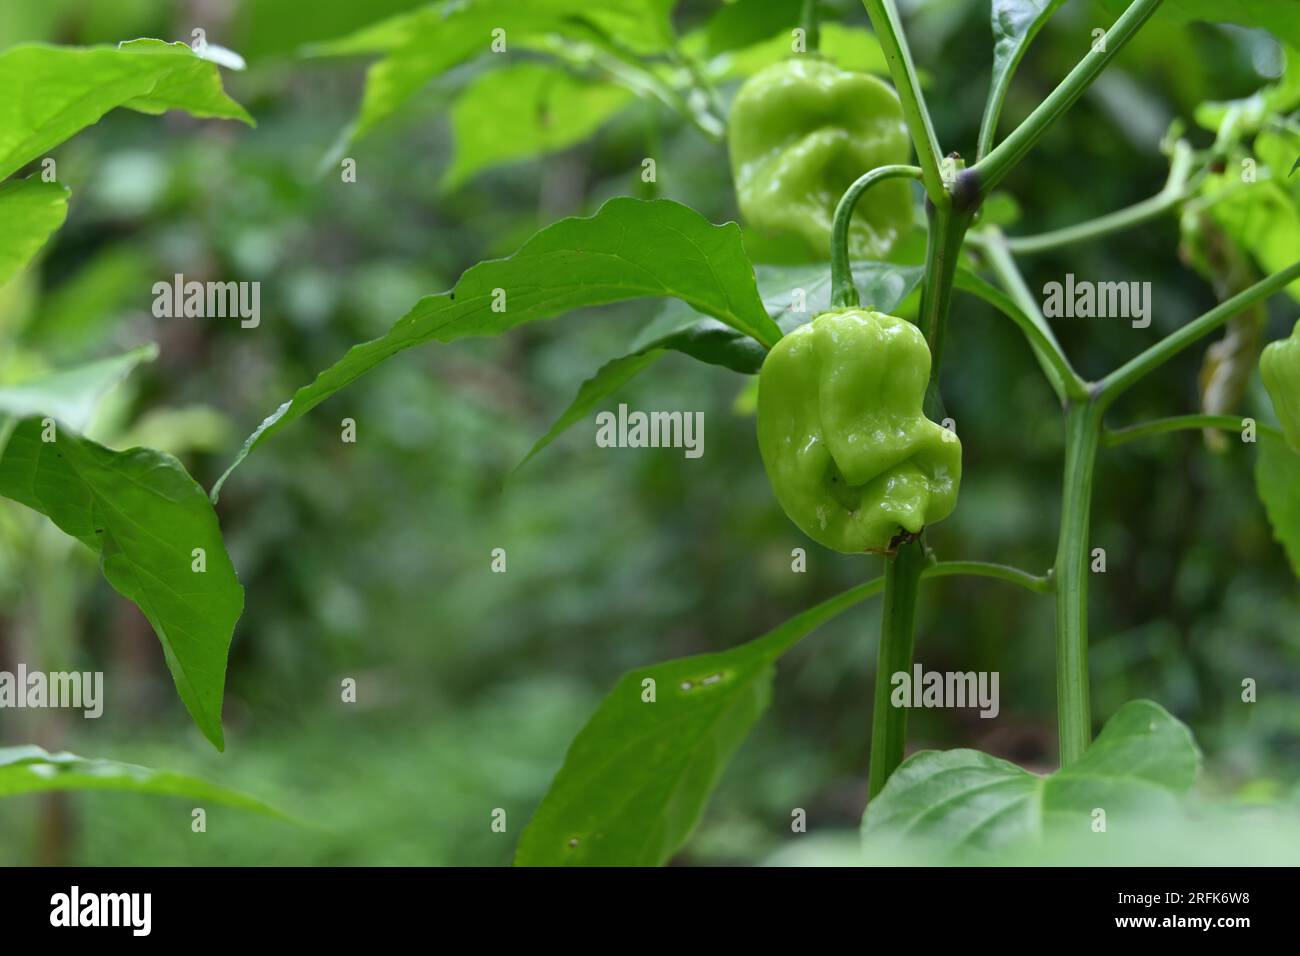 View of a green color Capsicum Chinense chili fruit developing on the chili plant stem Stock Photo